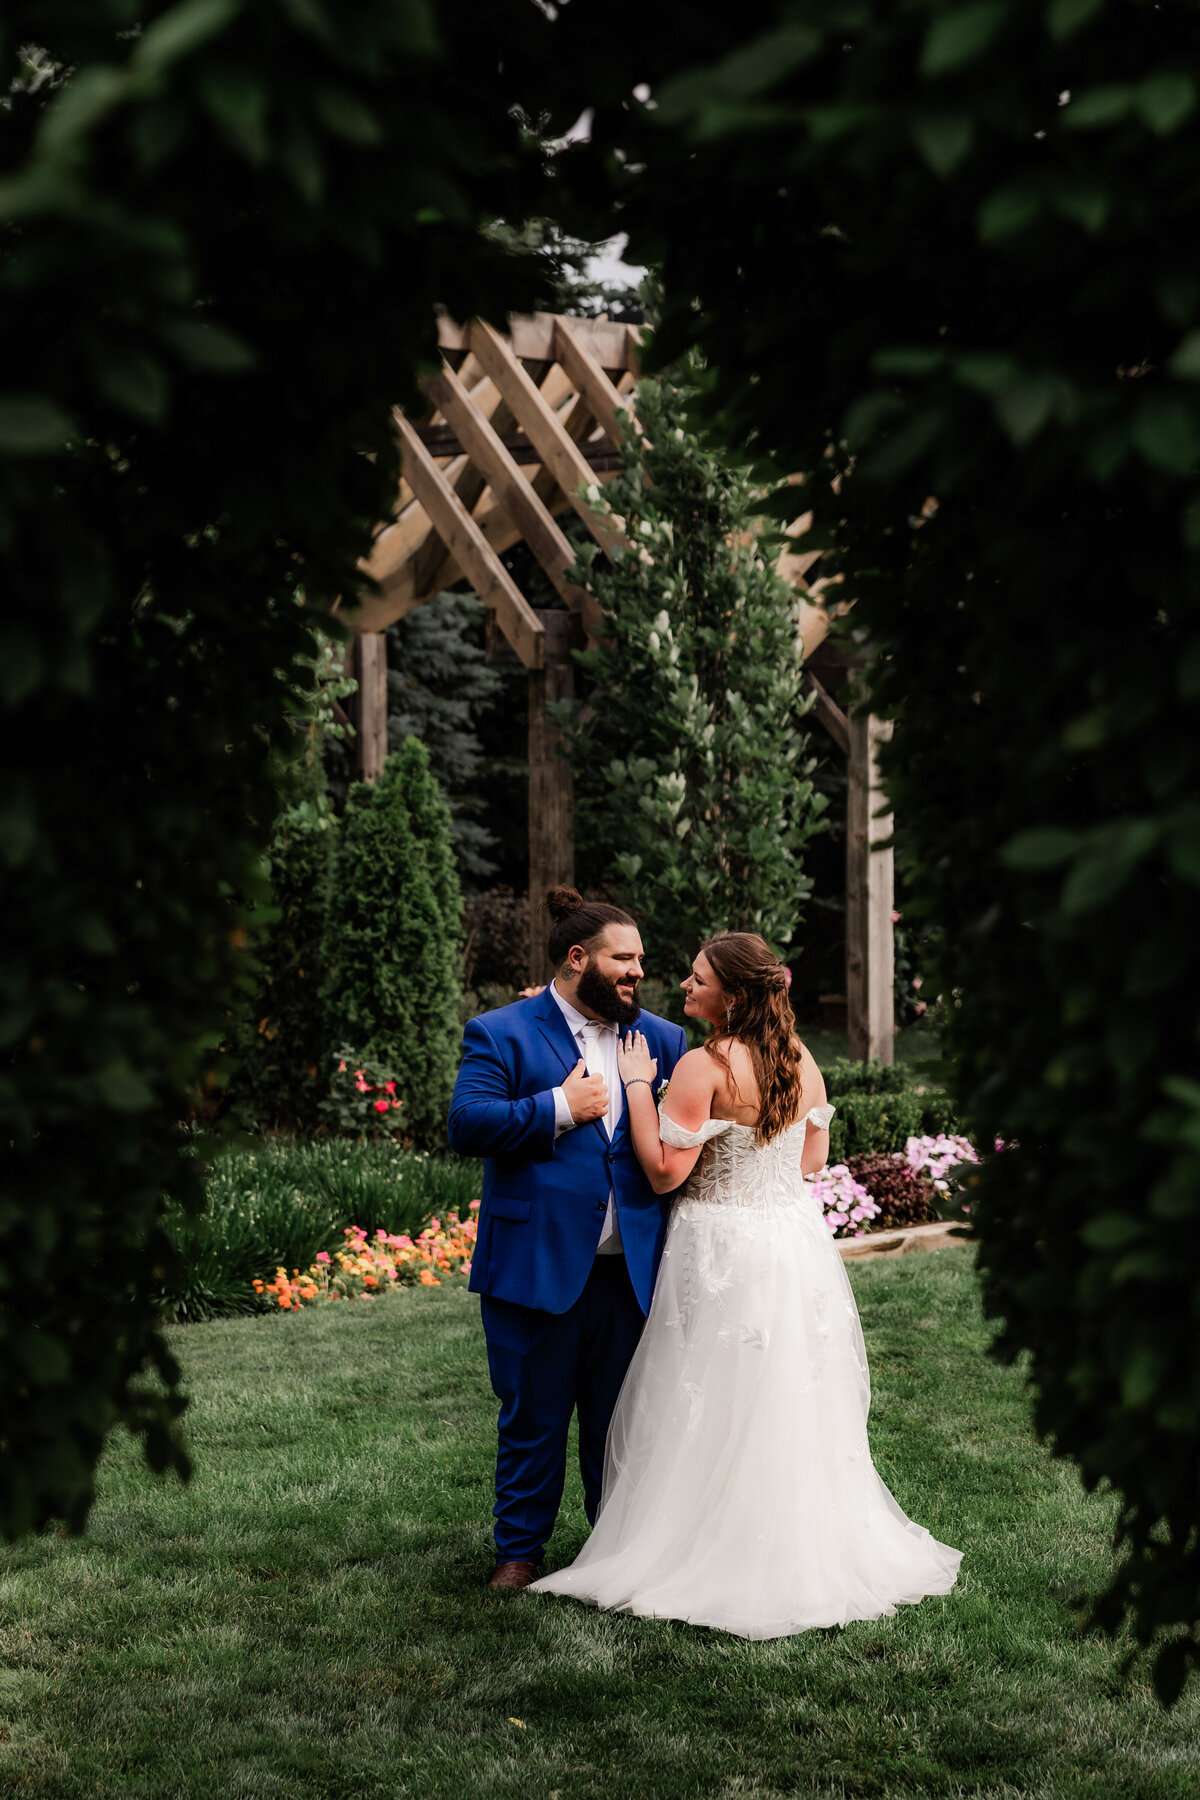 A couples photo through the trees at The Farmhouse in Plainfield.